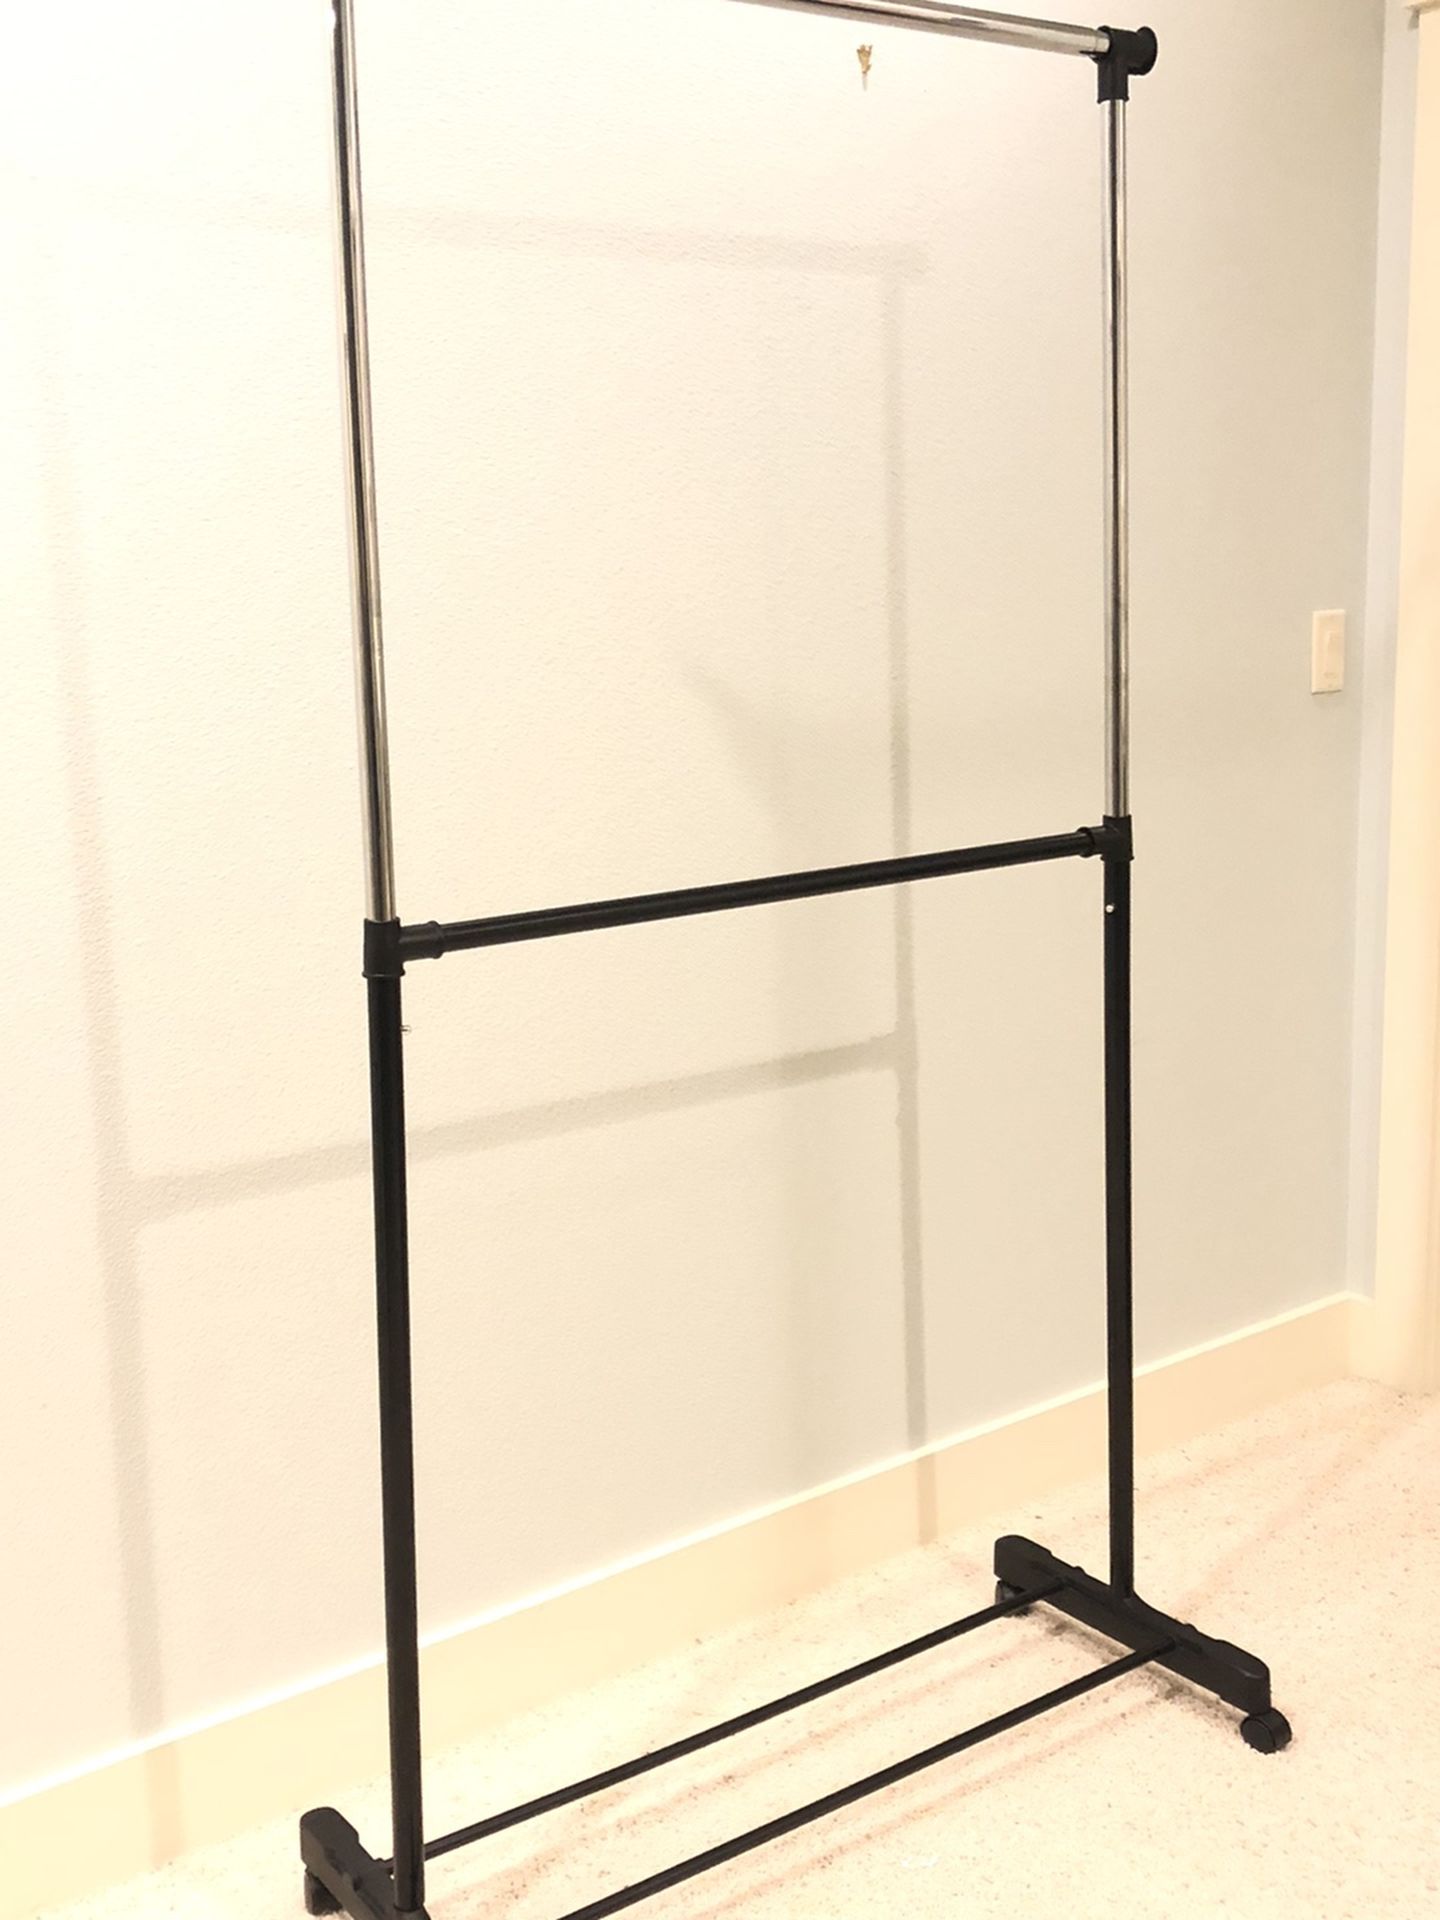 Cloth Rack / Hanger With Wheels